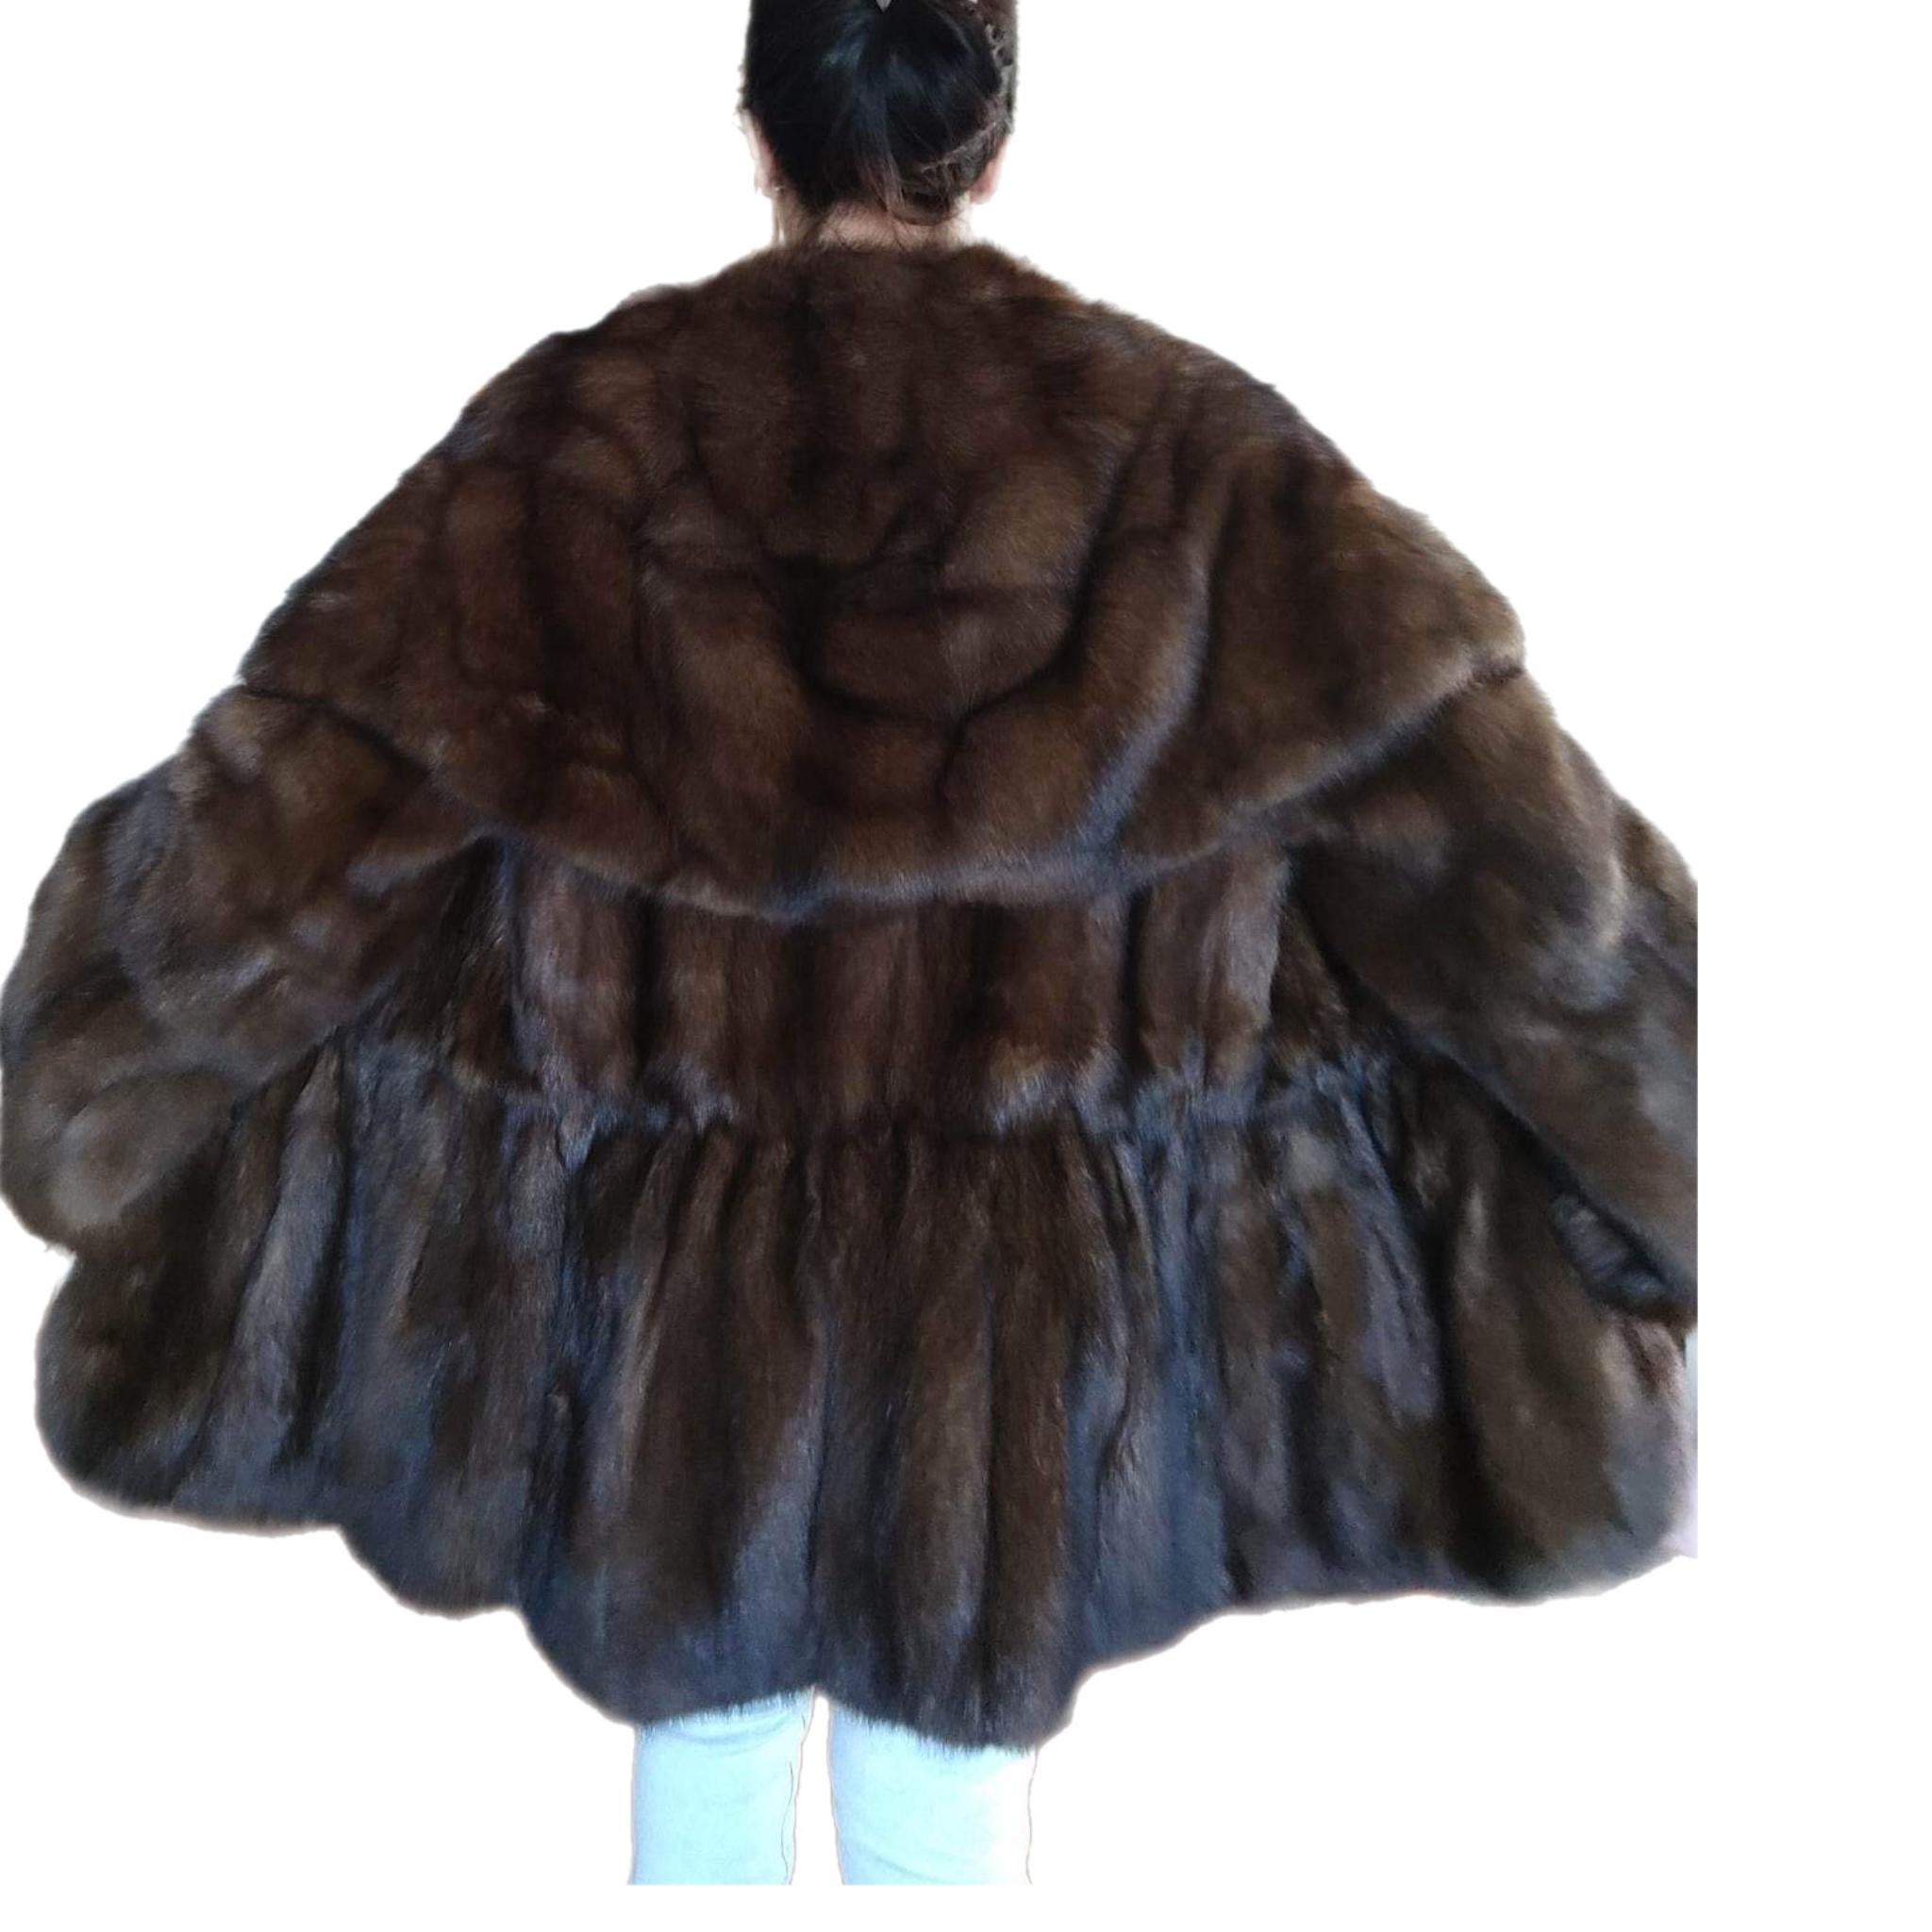 Christian Dior Russian Sable fur coat size 12 tags 55000$ In New Condition For Sale In Montreal, Quebec